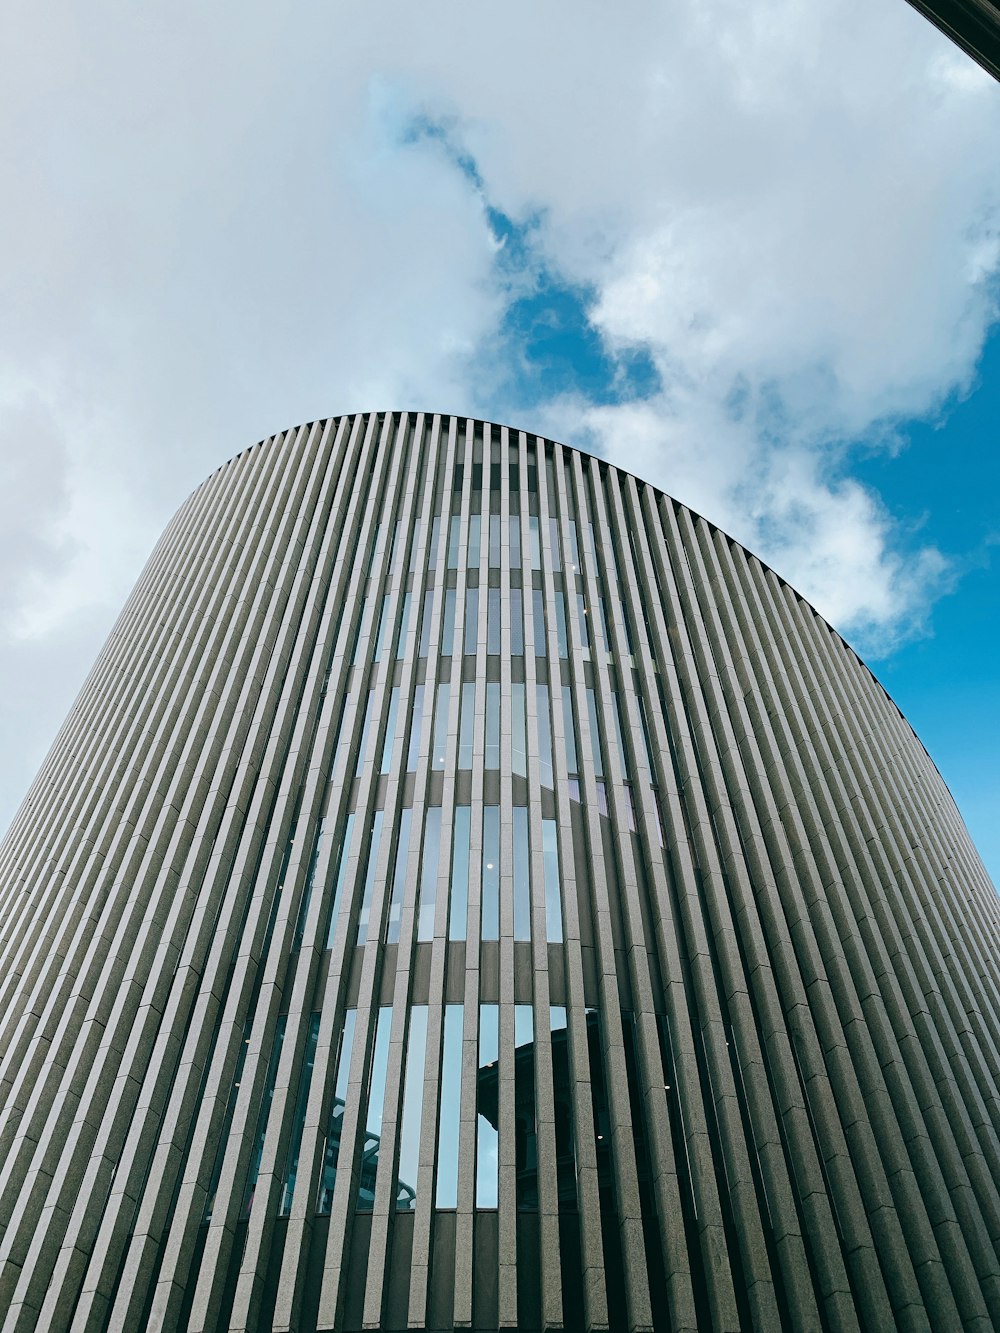 gray concrete building under blue sky and white clouds during daytime